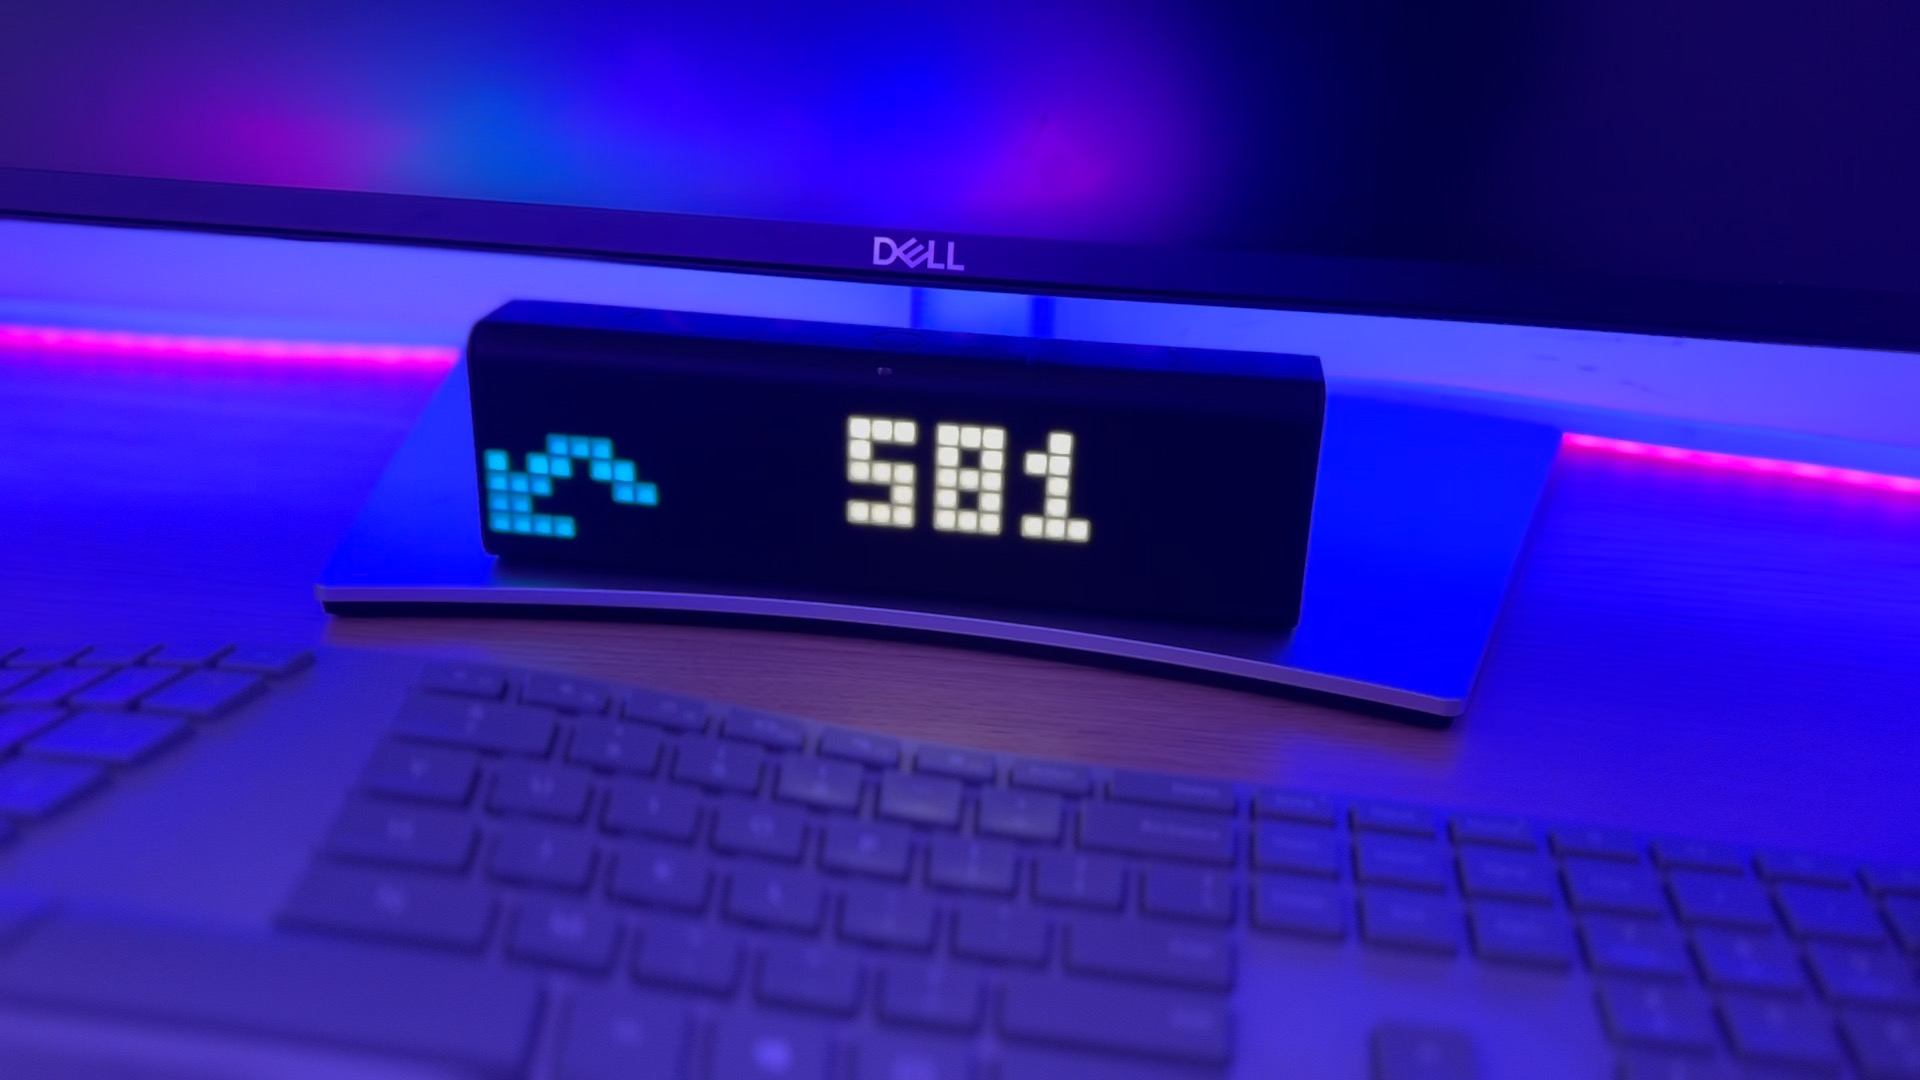 Smart display showing a circular arrow going counter-clockwise and the text 581